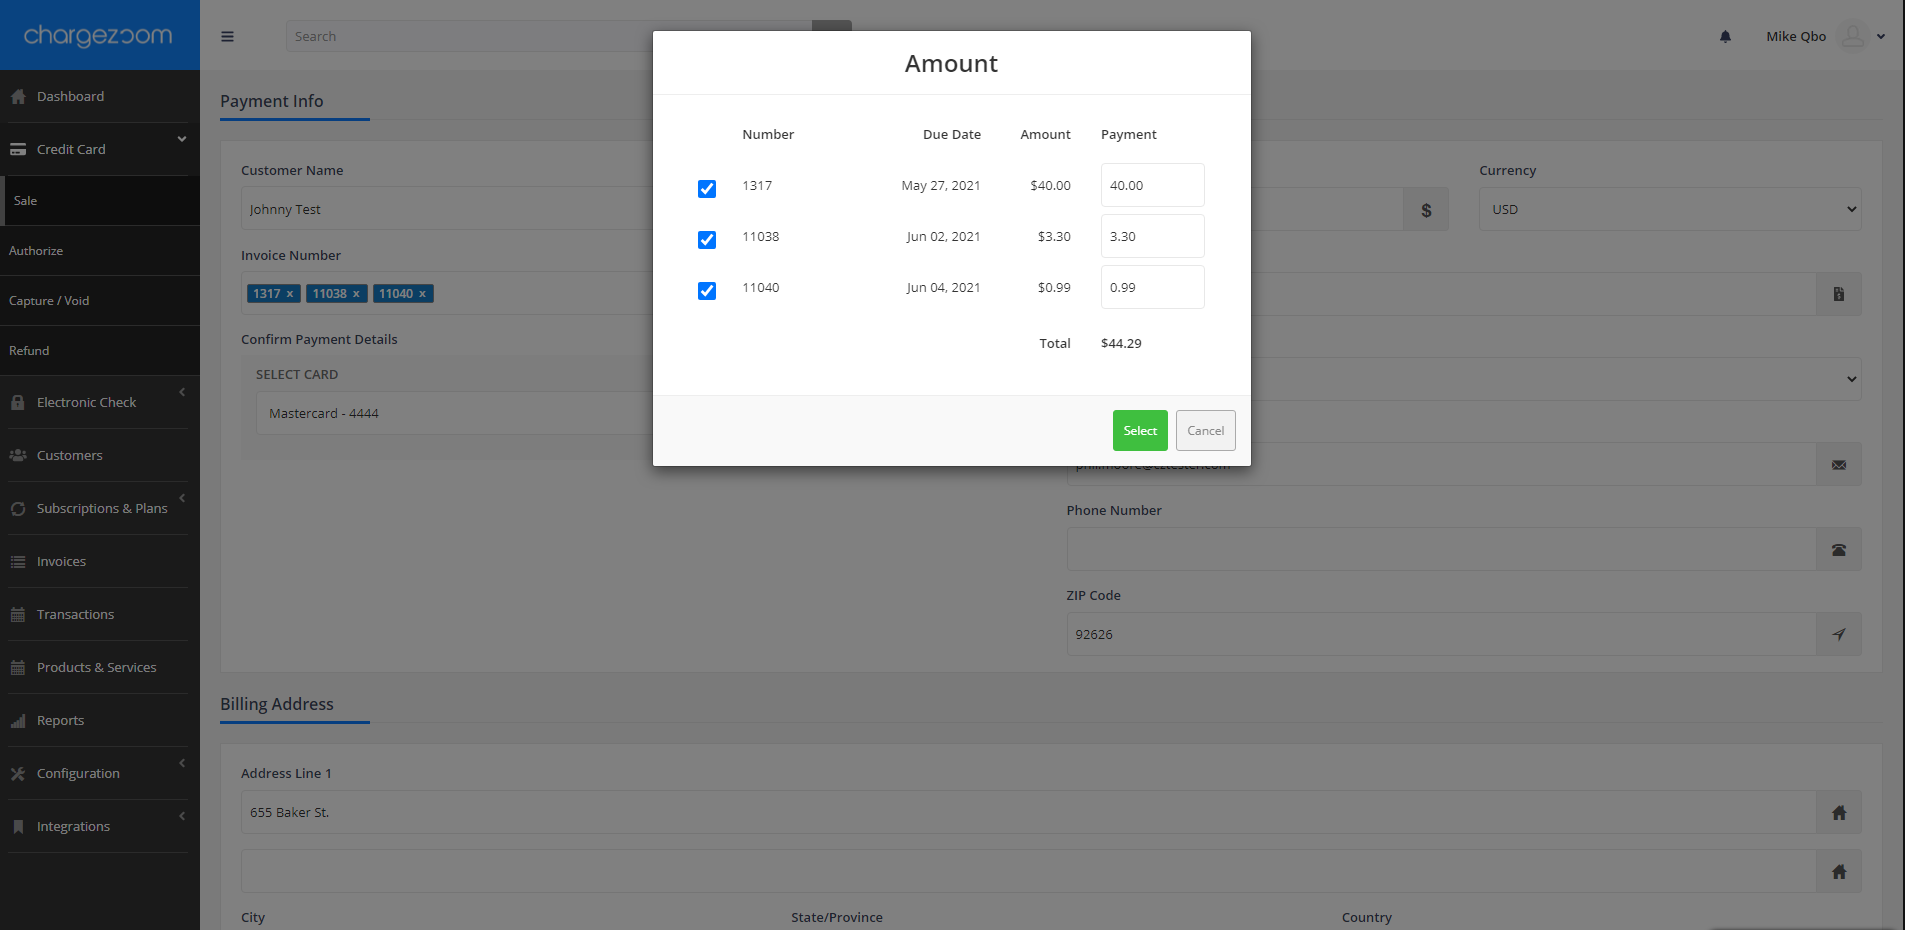 Payment terminal allows for payment against multiple invoices